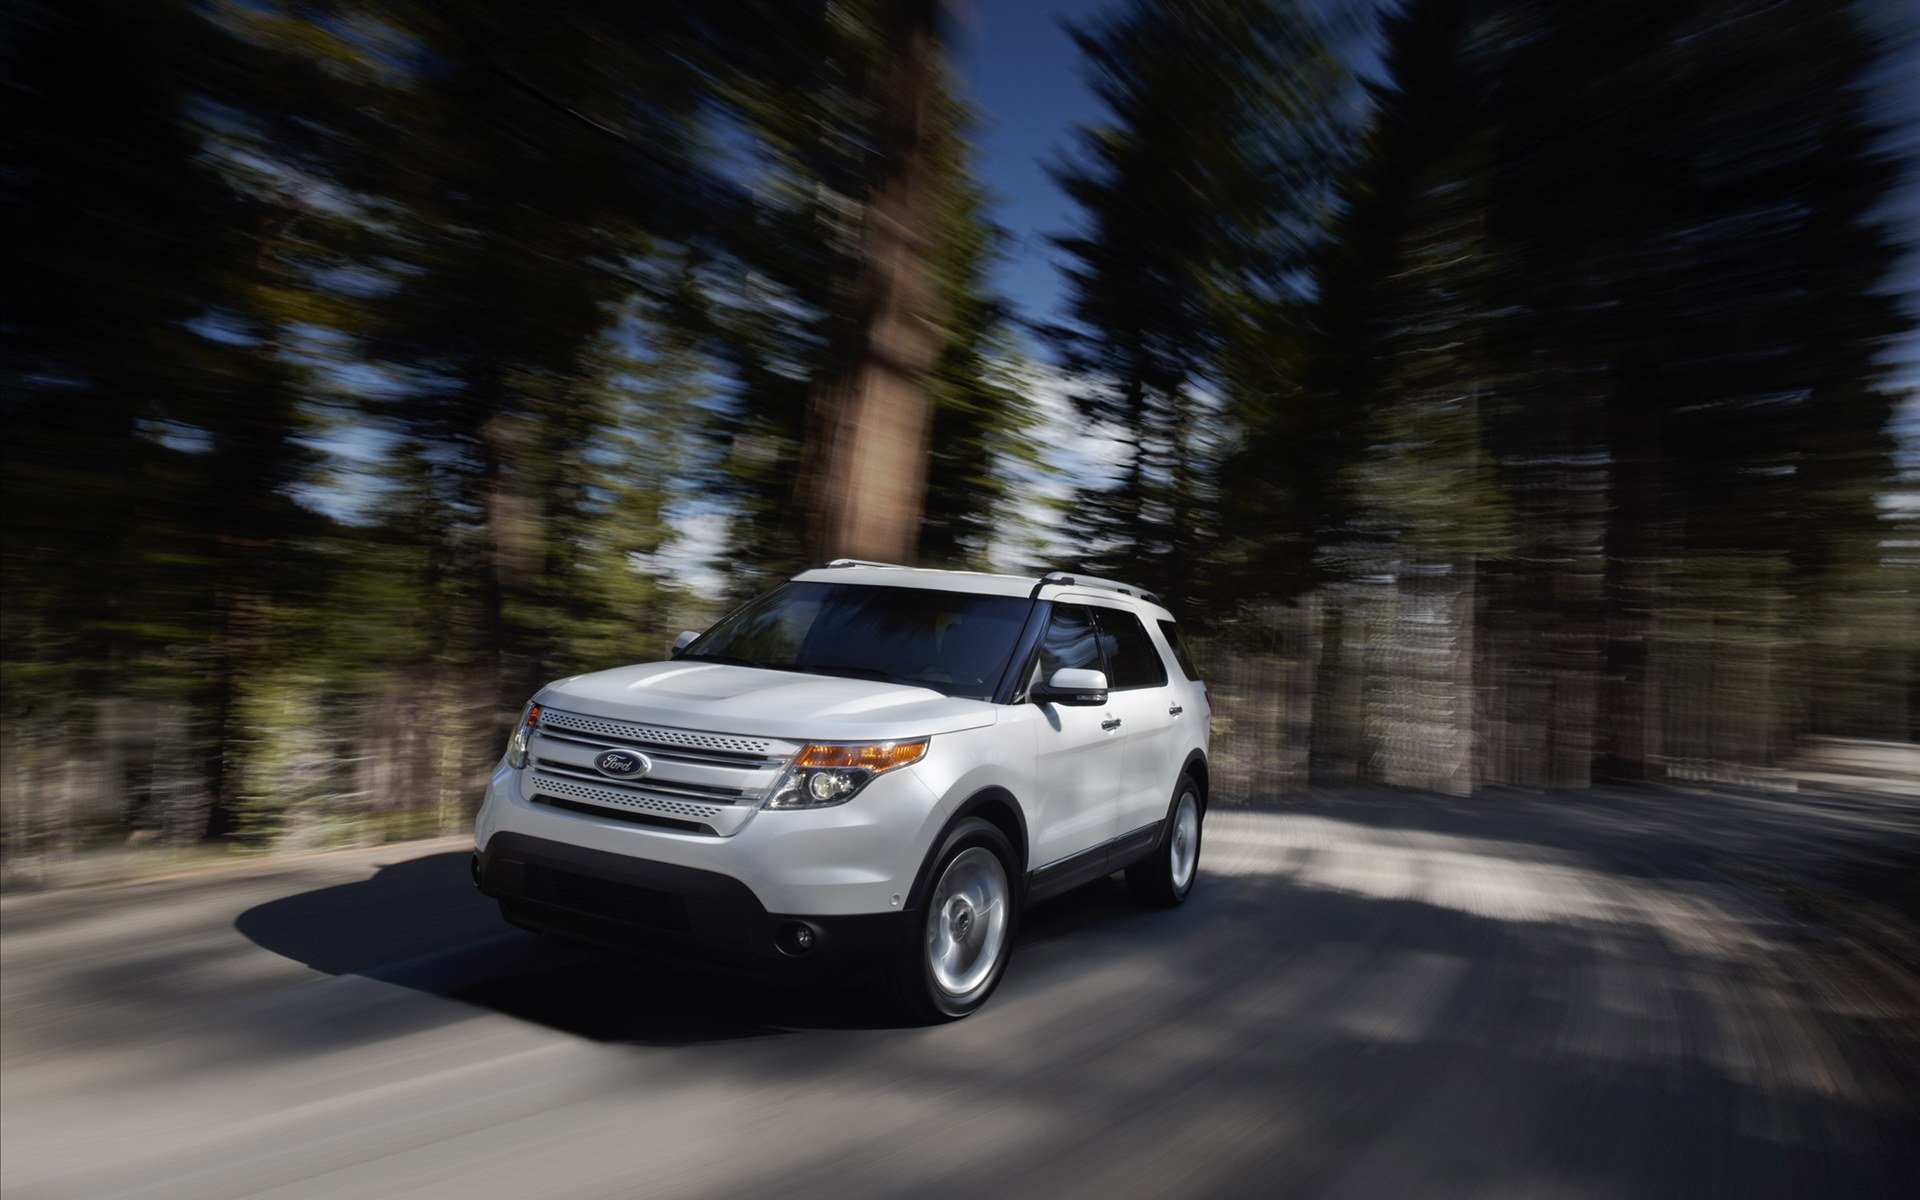 ford explorer, vehicles, ford High Definition image